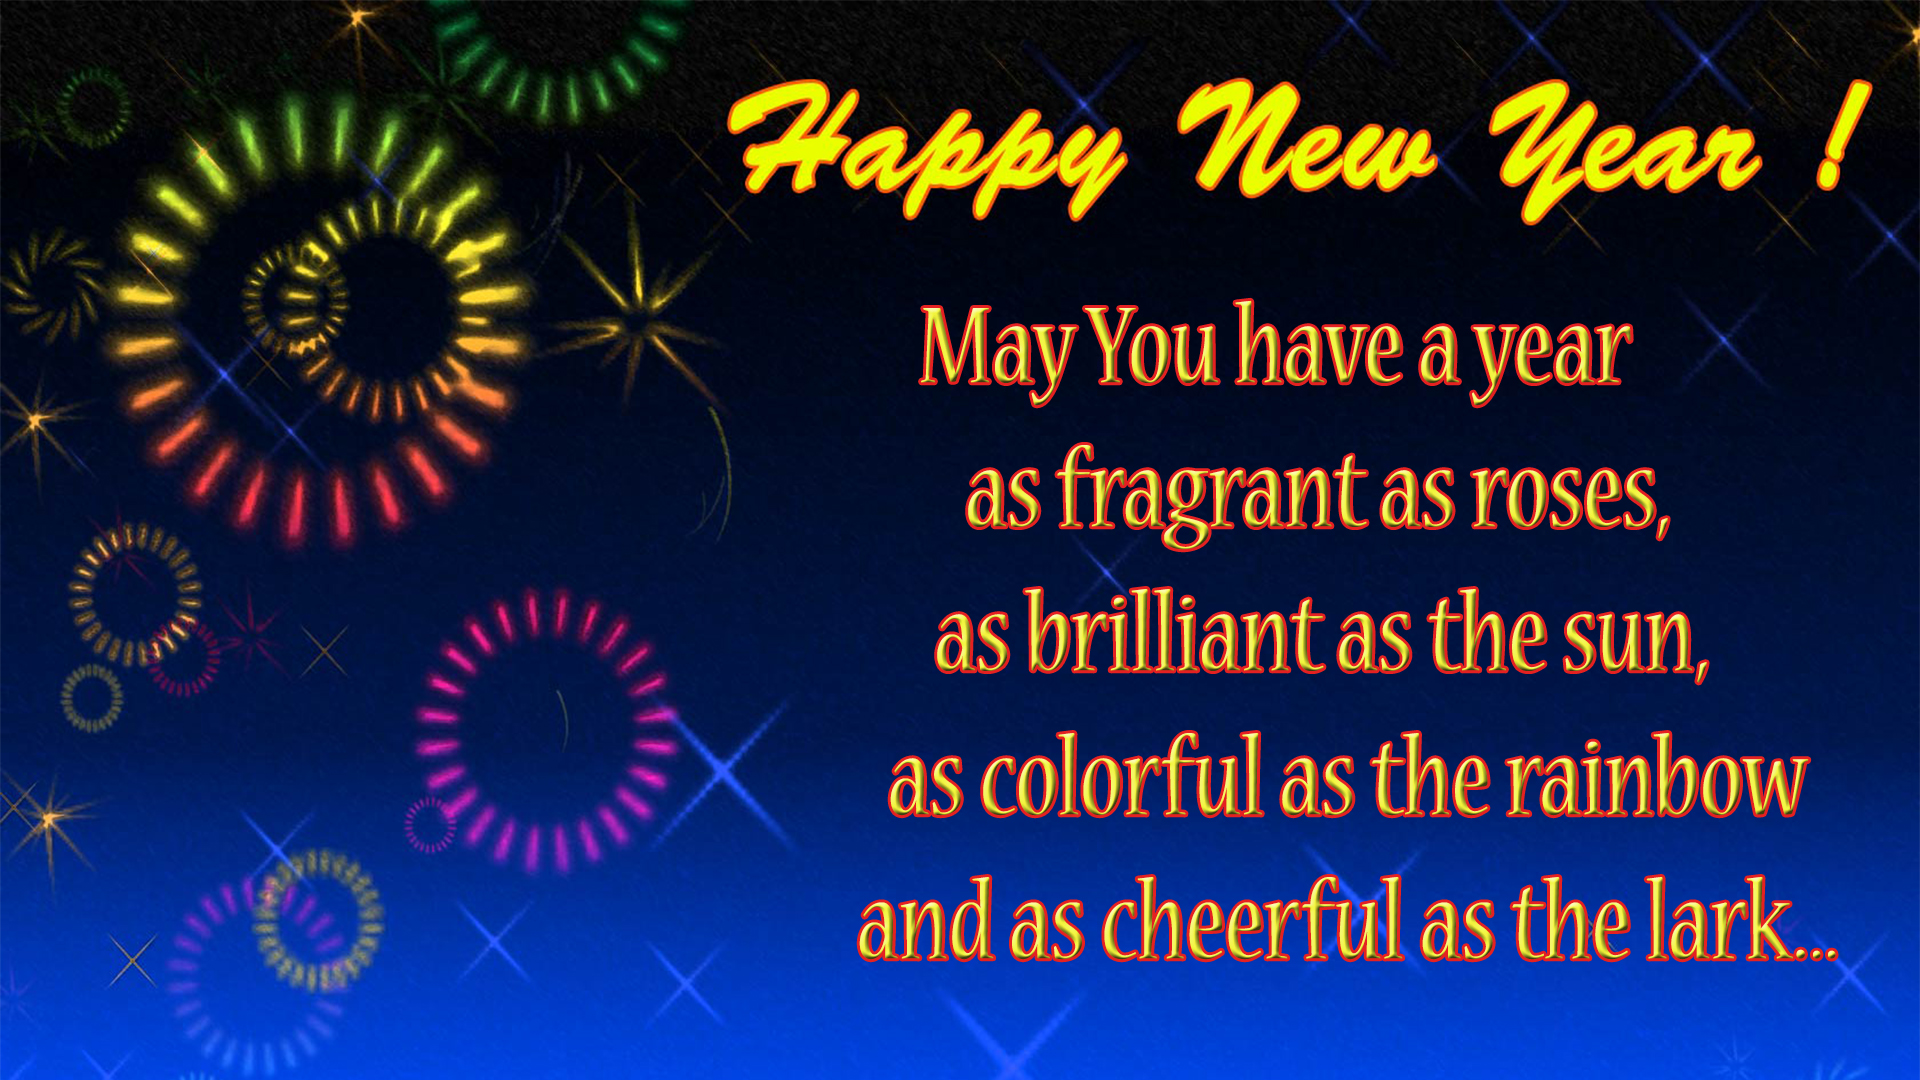 wishes for new year 2018